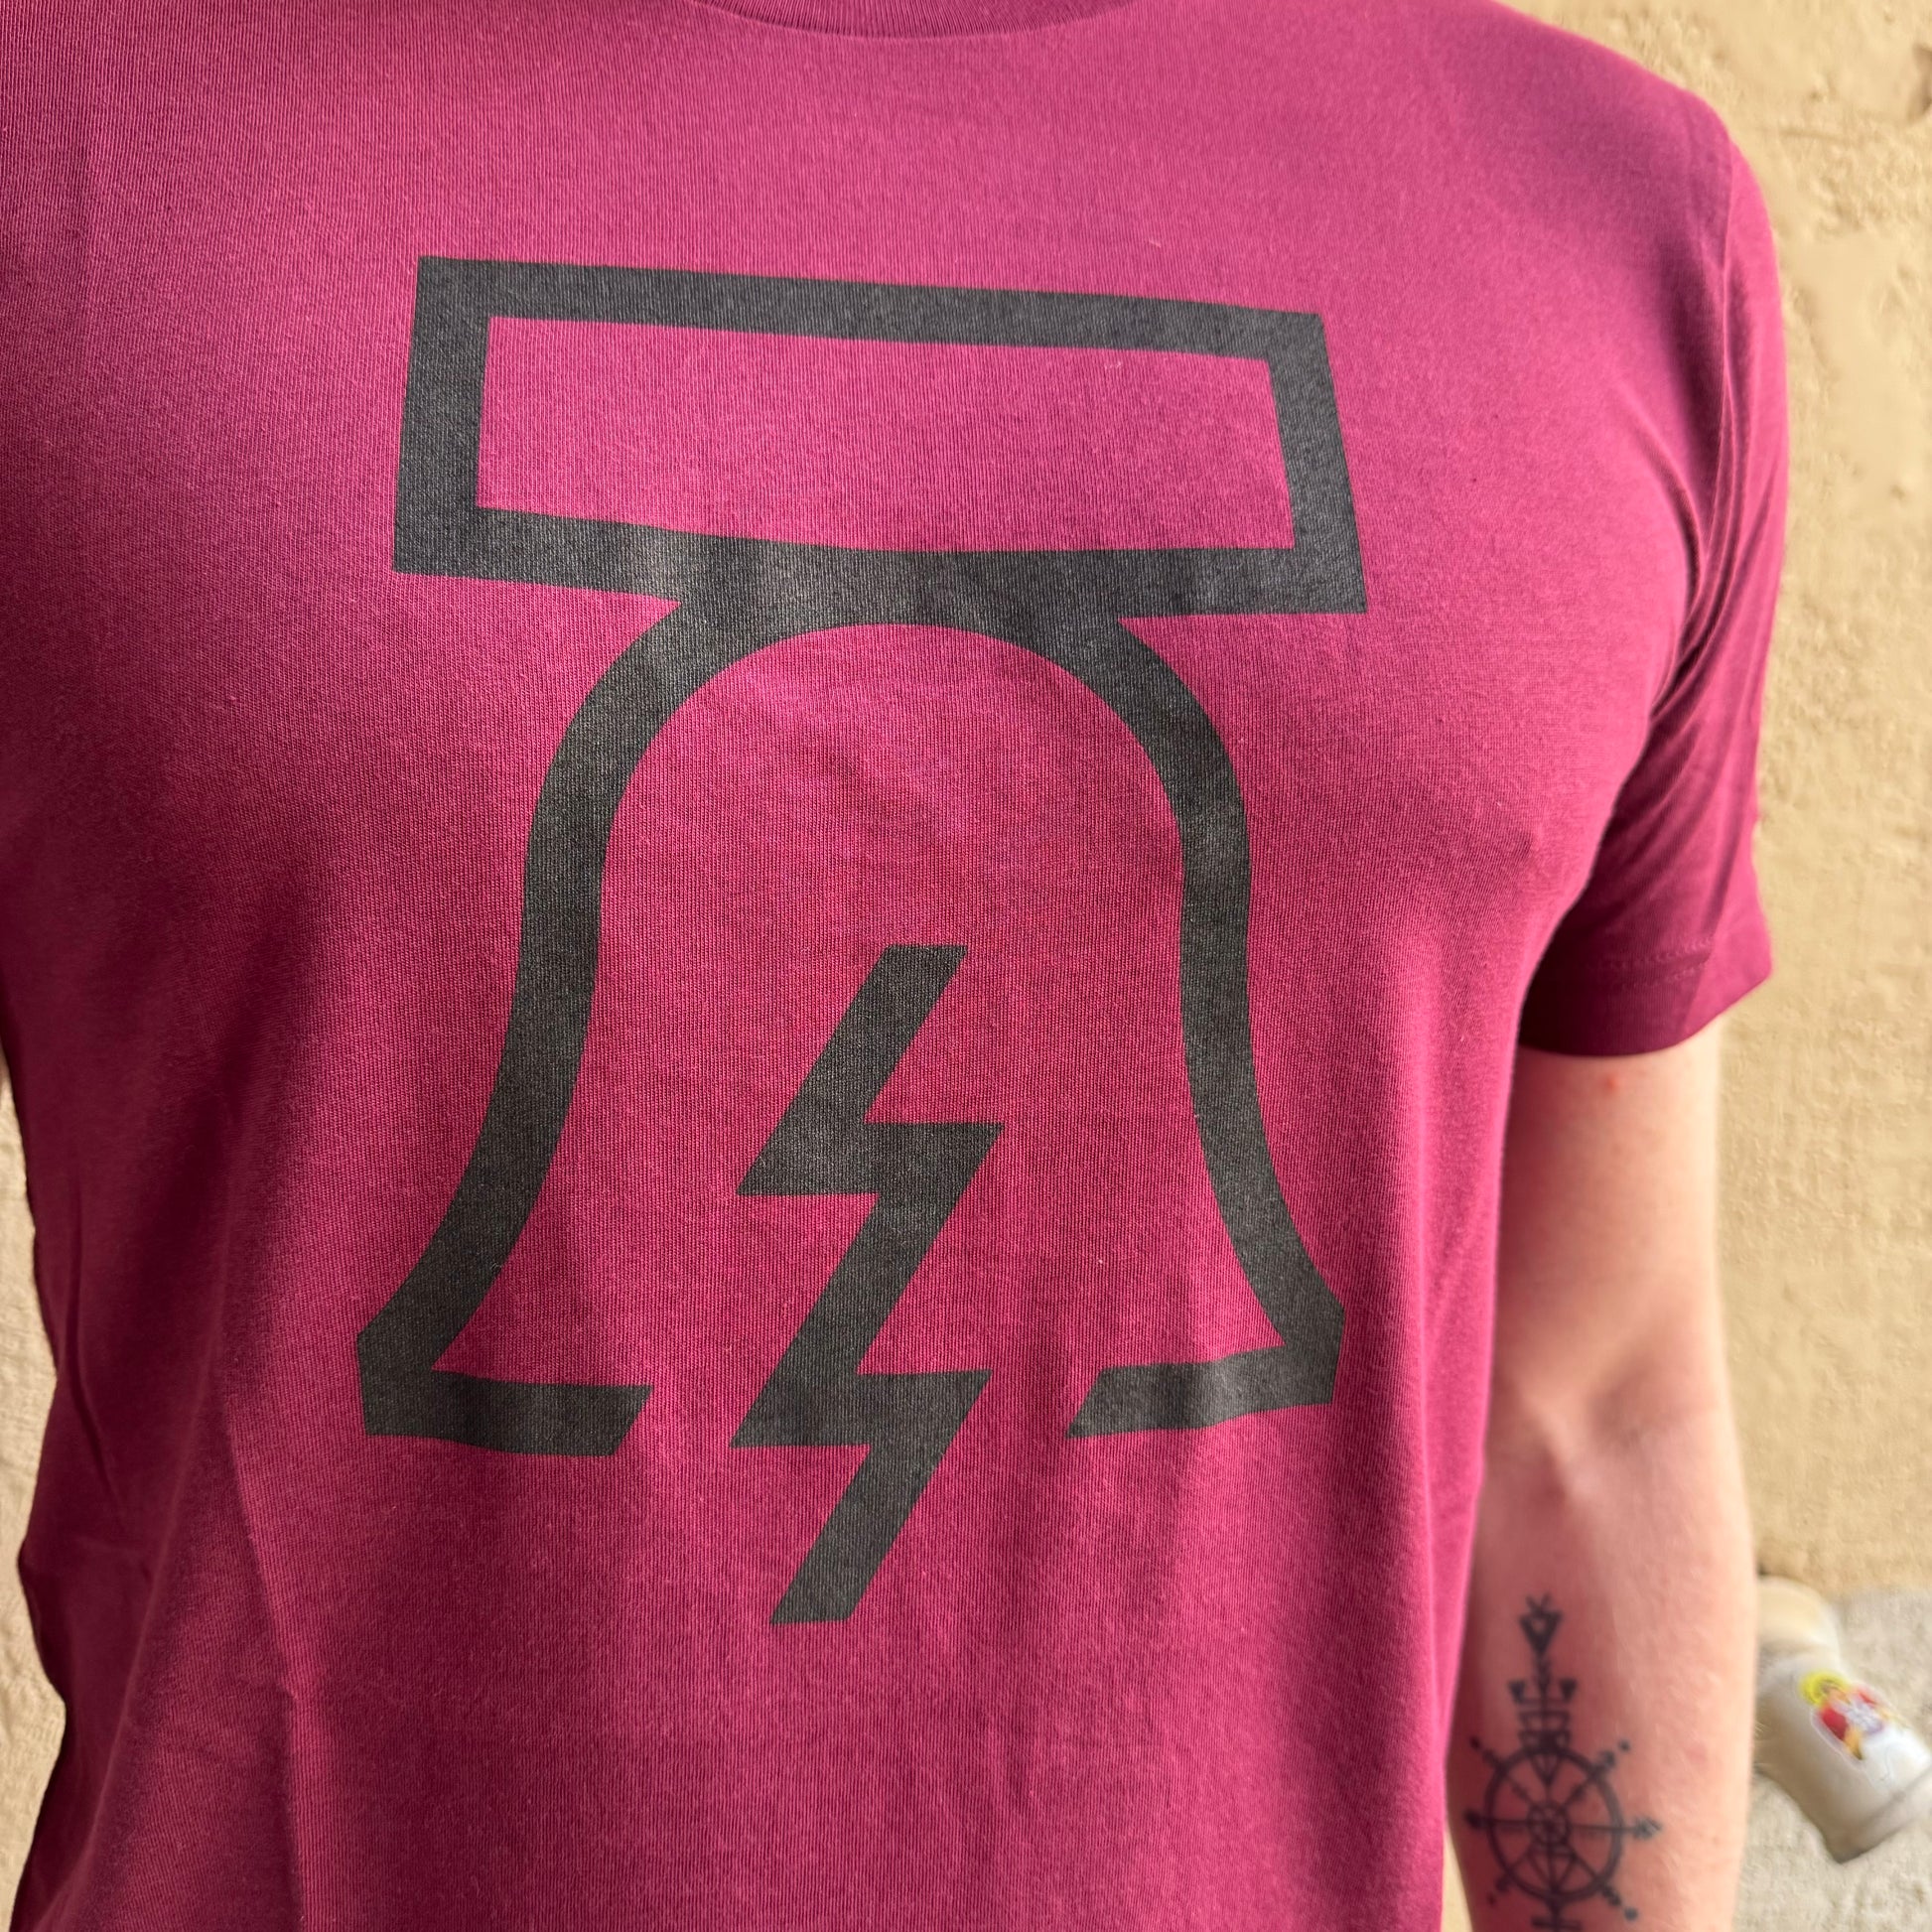 Close-up of a person wearing a maroon unisex Philadelphia Independents Bell & Bolt T-Shirt with a black, stylized design of the Liberty Bell and lightning bolt. The person has a tattoo on their left forearm.